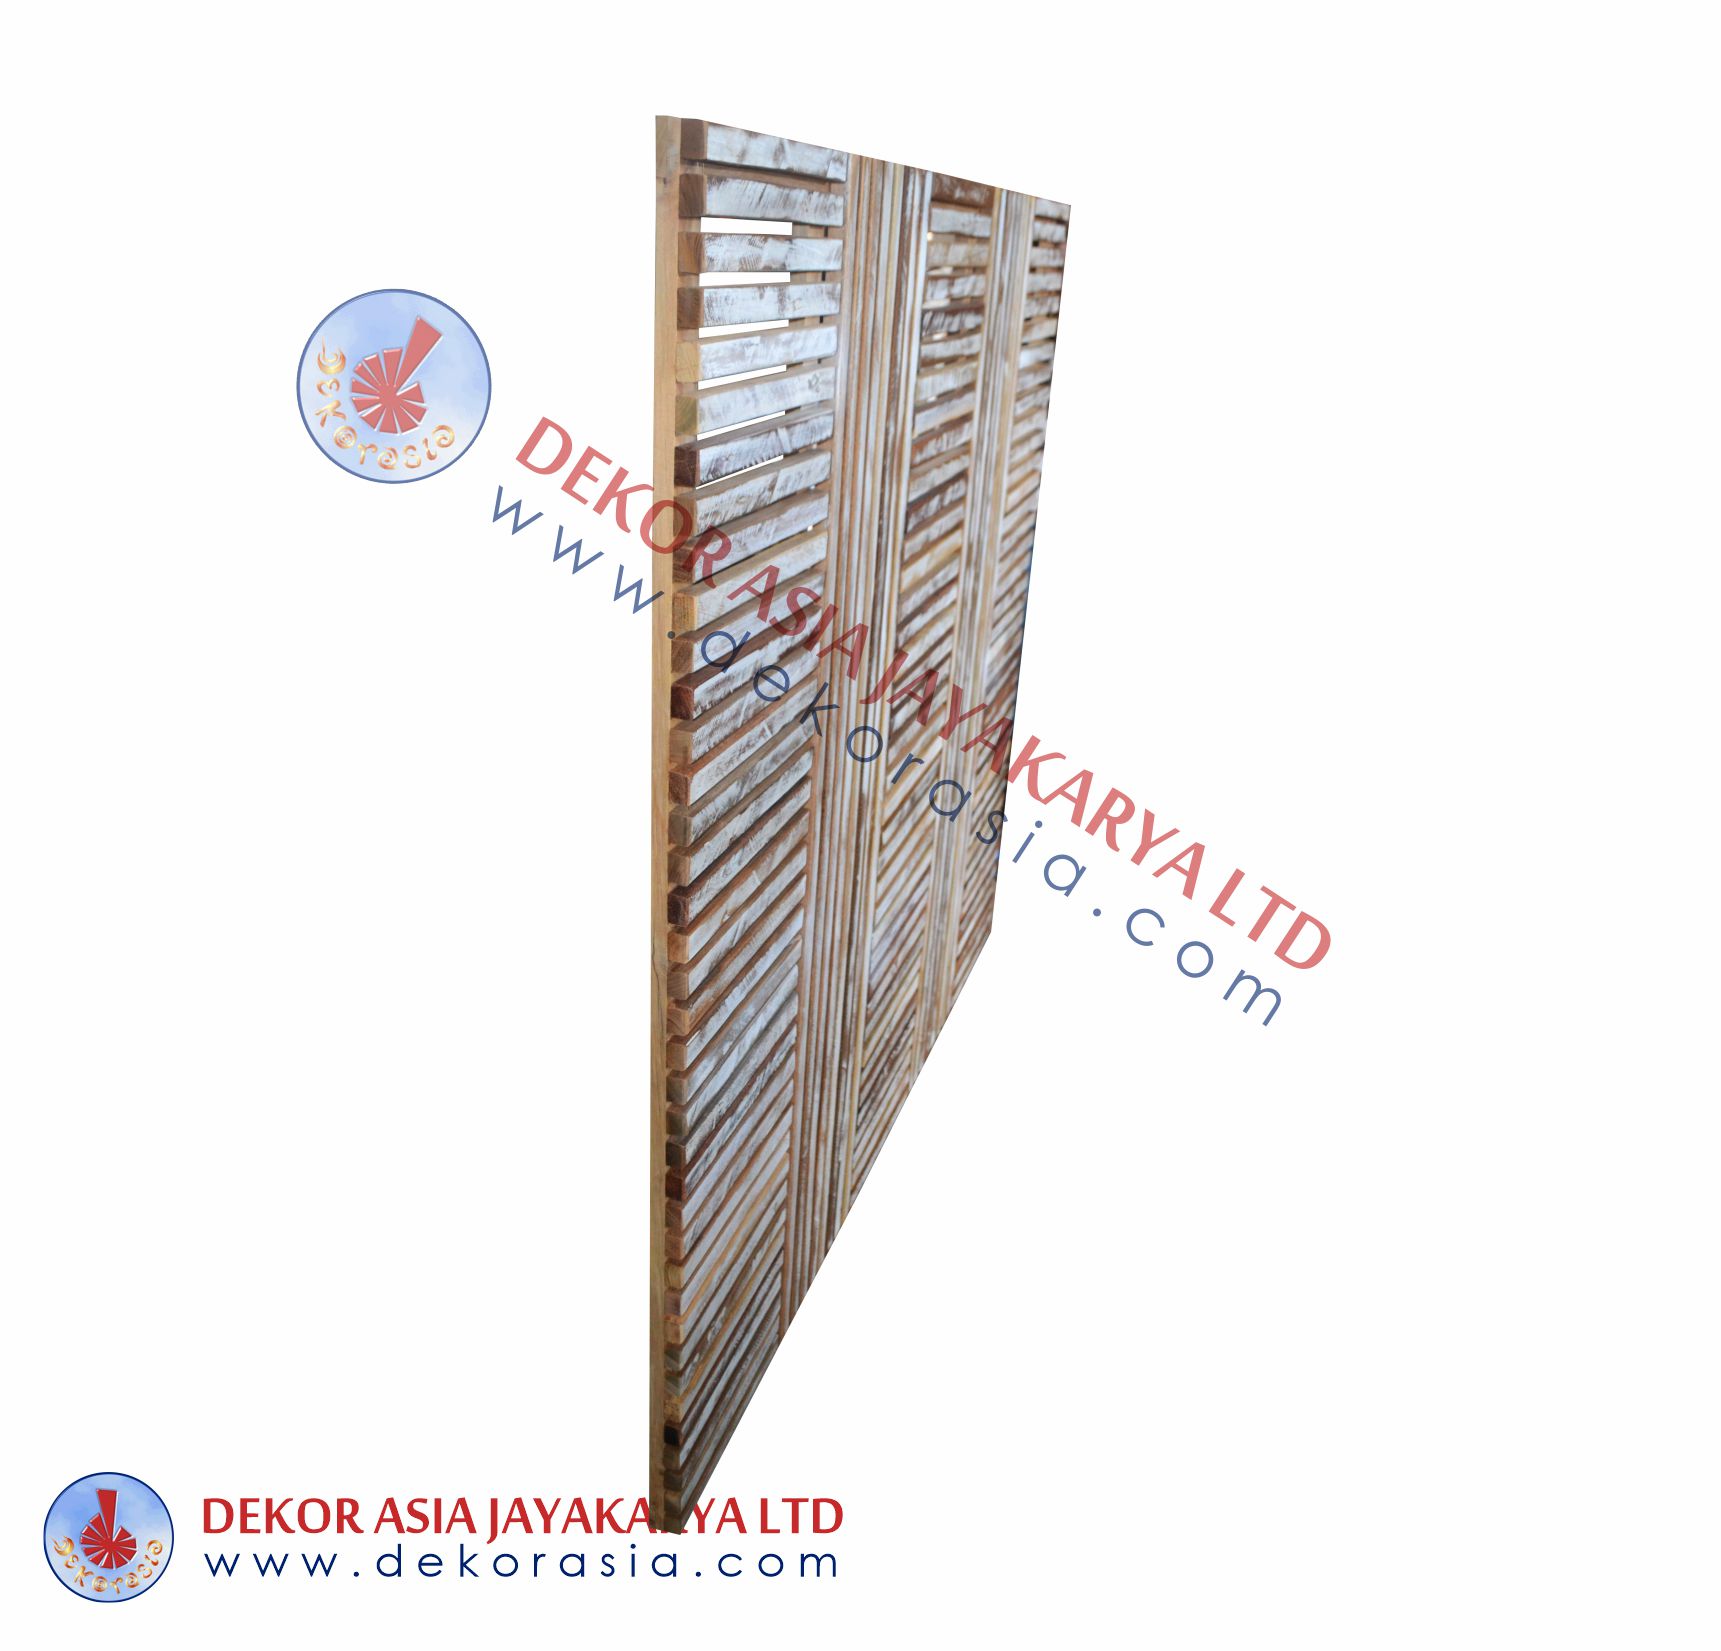 Teak Timber Screen / Wooden Screen Recycled teak timber screen for indoor and outdoor